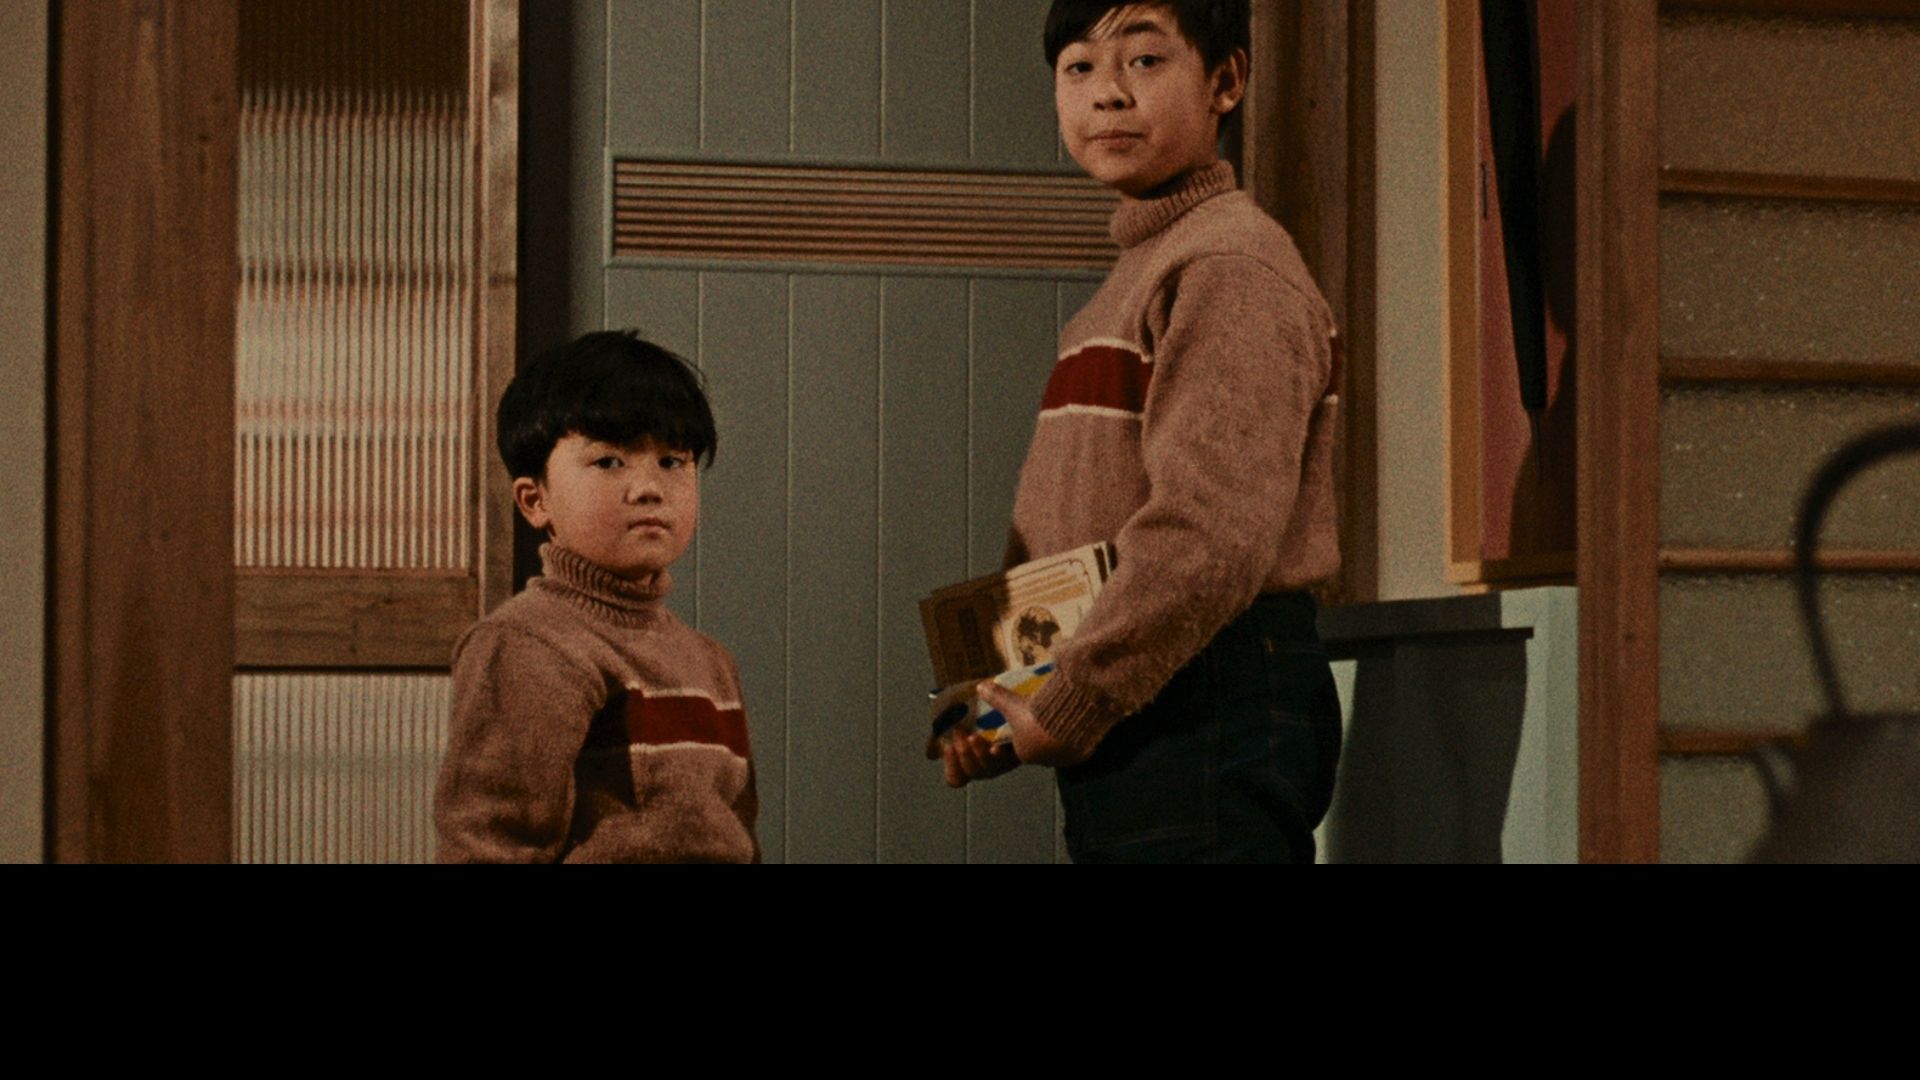 two young boys in sweaters holding books turning around